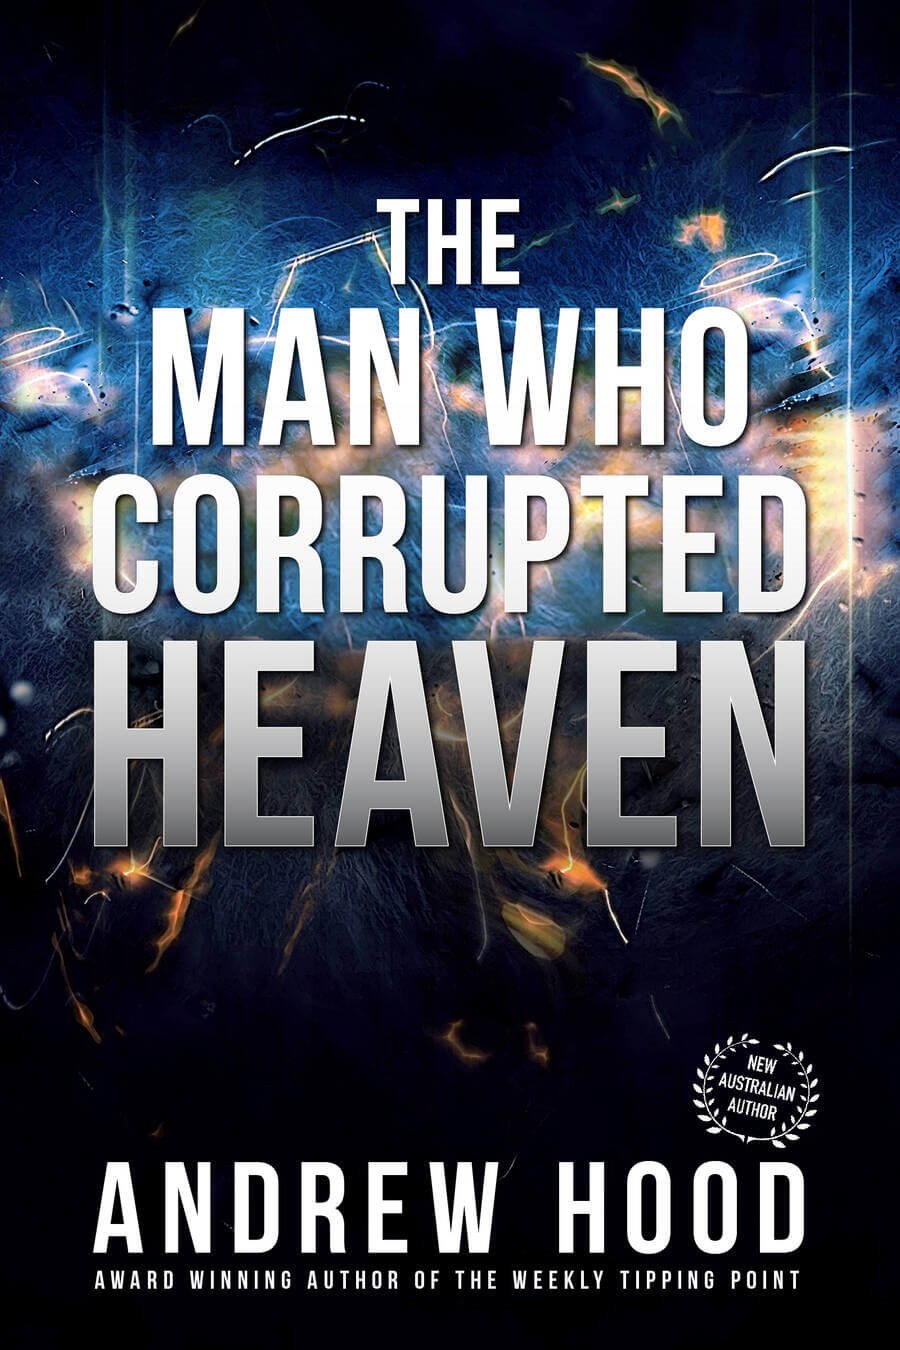 The Man Who Corrupted Heaven - Andrew Hood